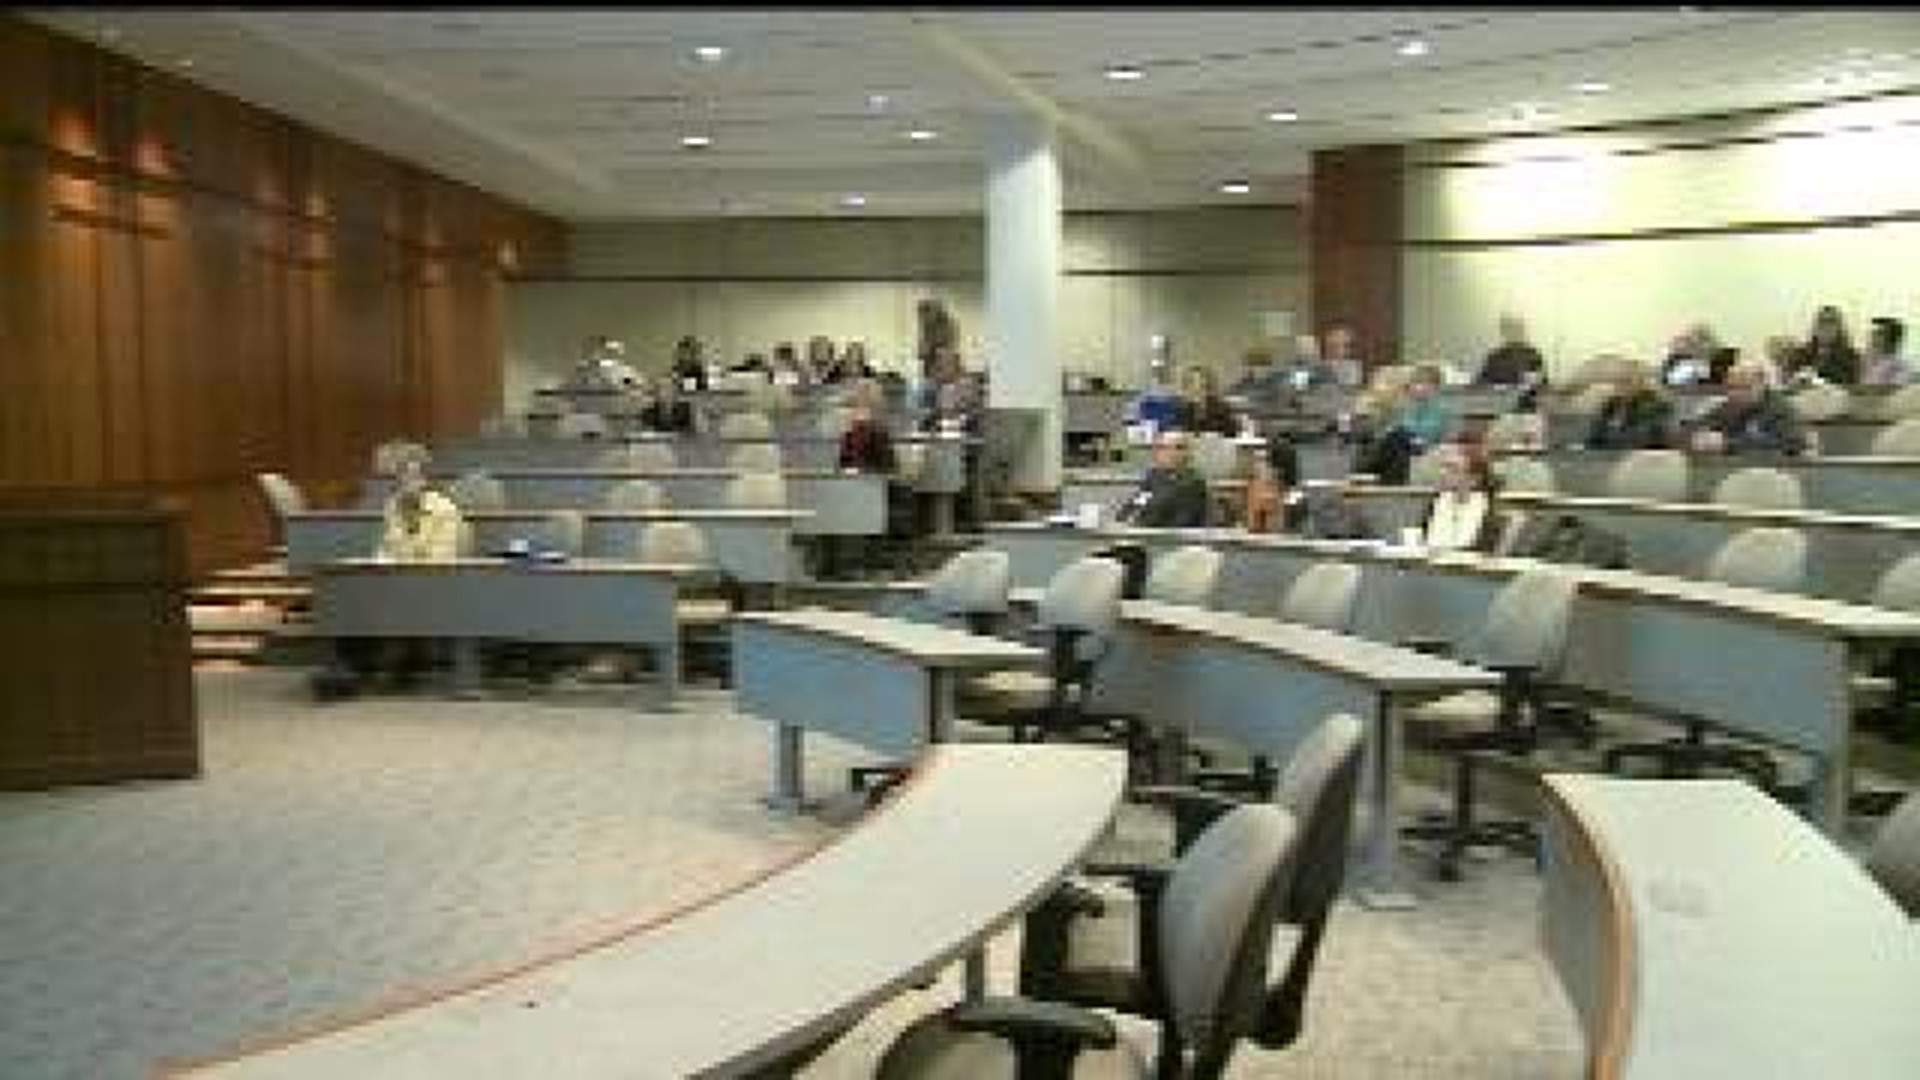 Local Conference on Human Trafficking Prevention